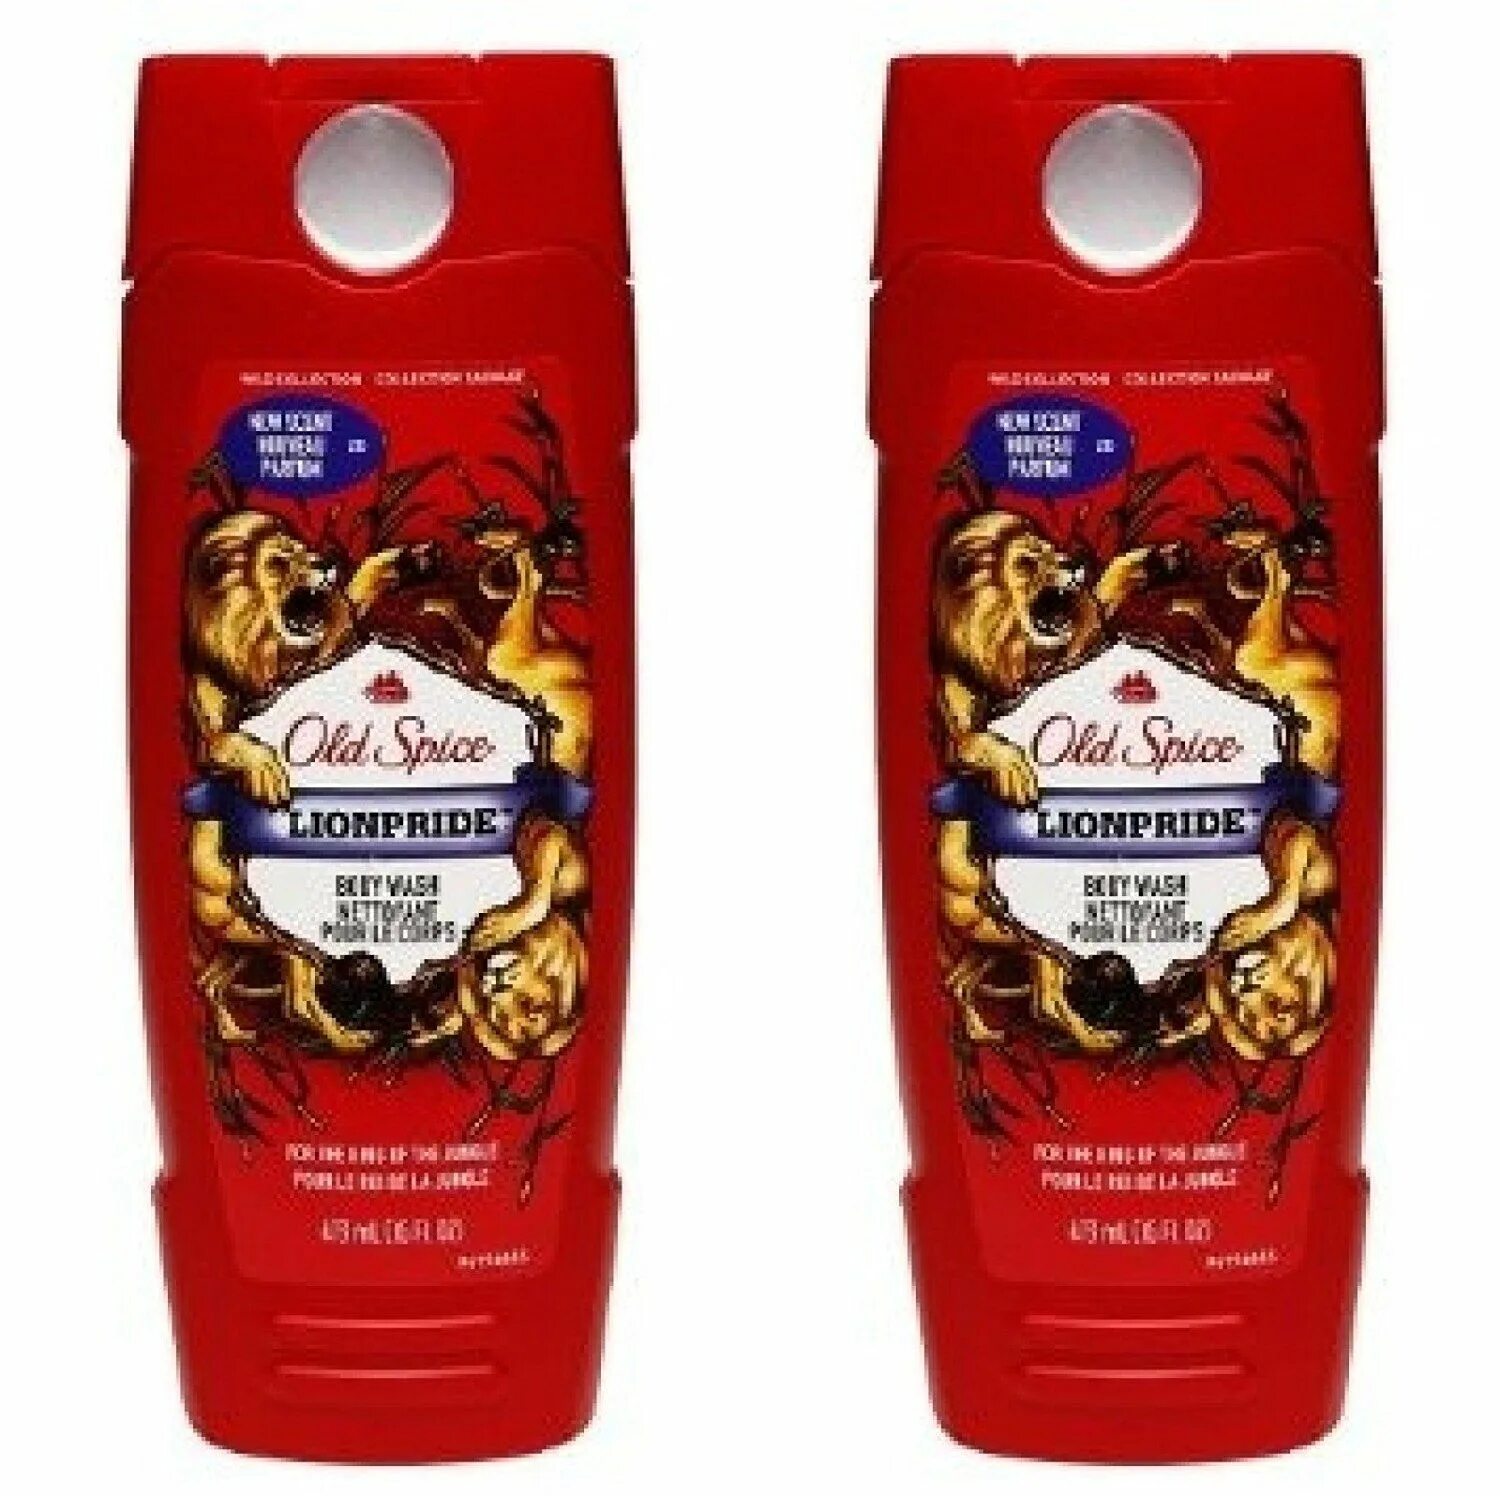 Old Spice Lionpride. Wild collection